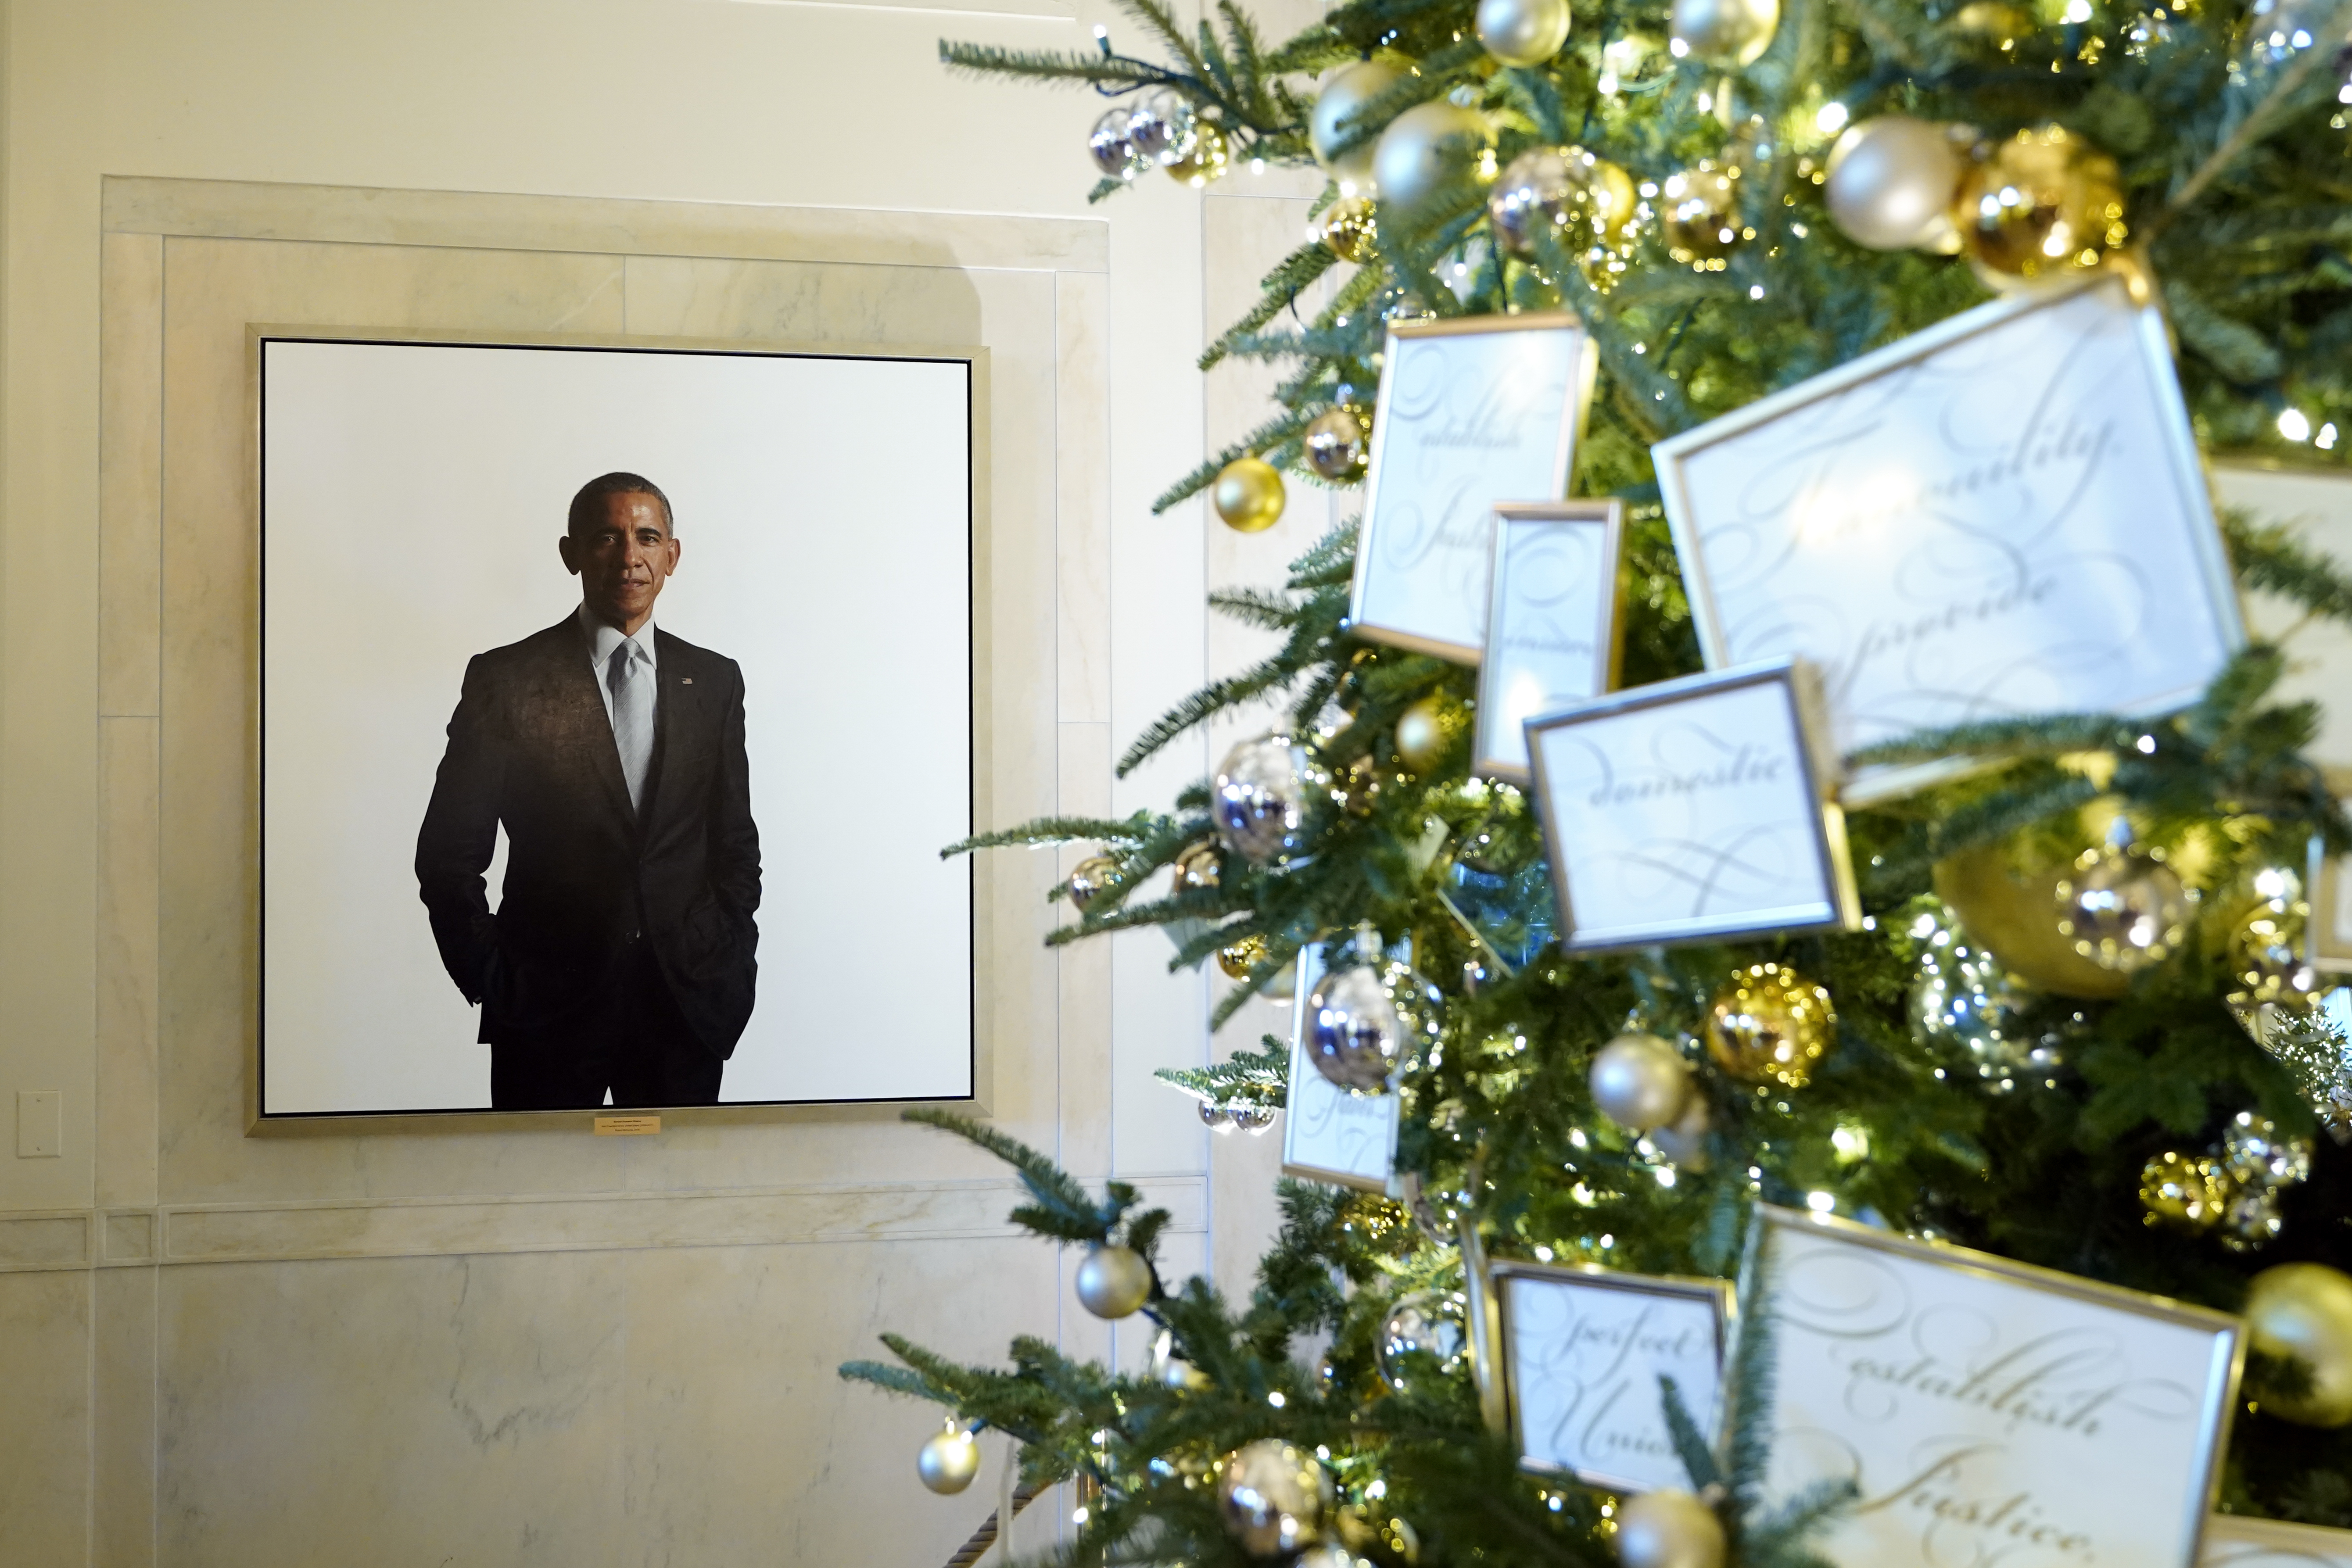 We the People' at heart of White House holiday decorations